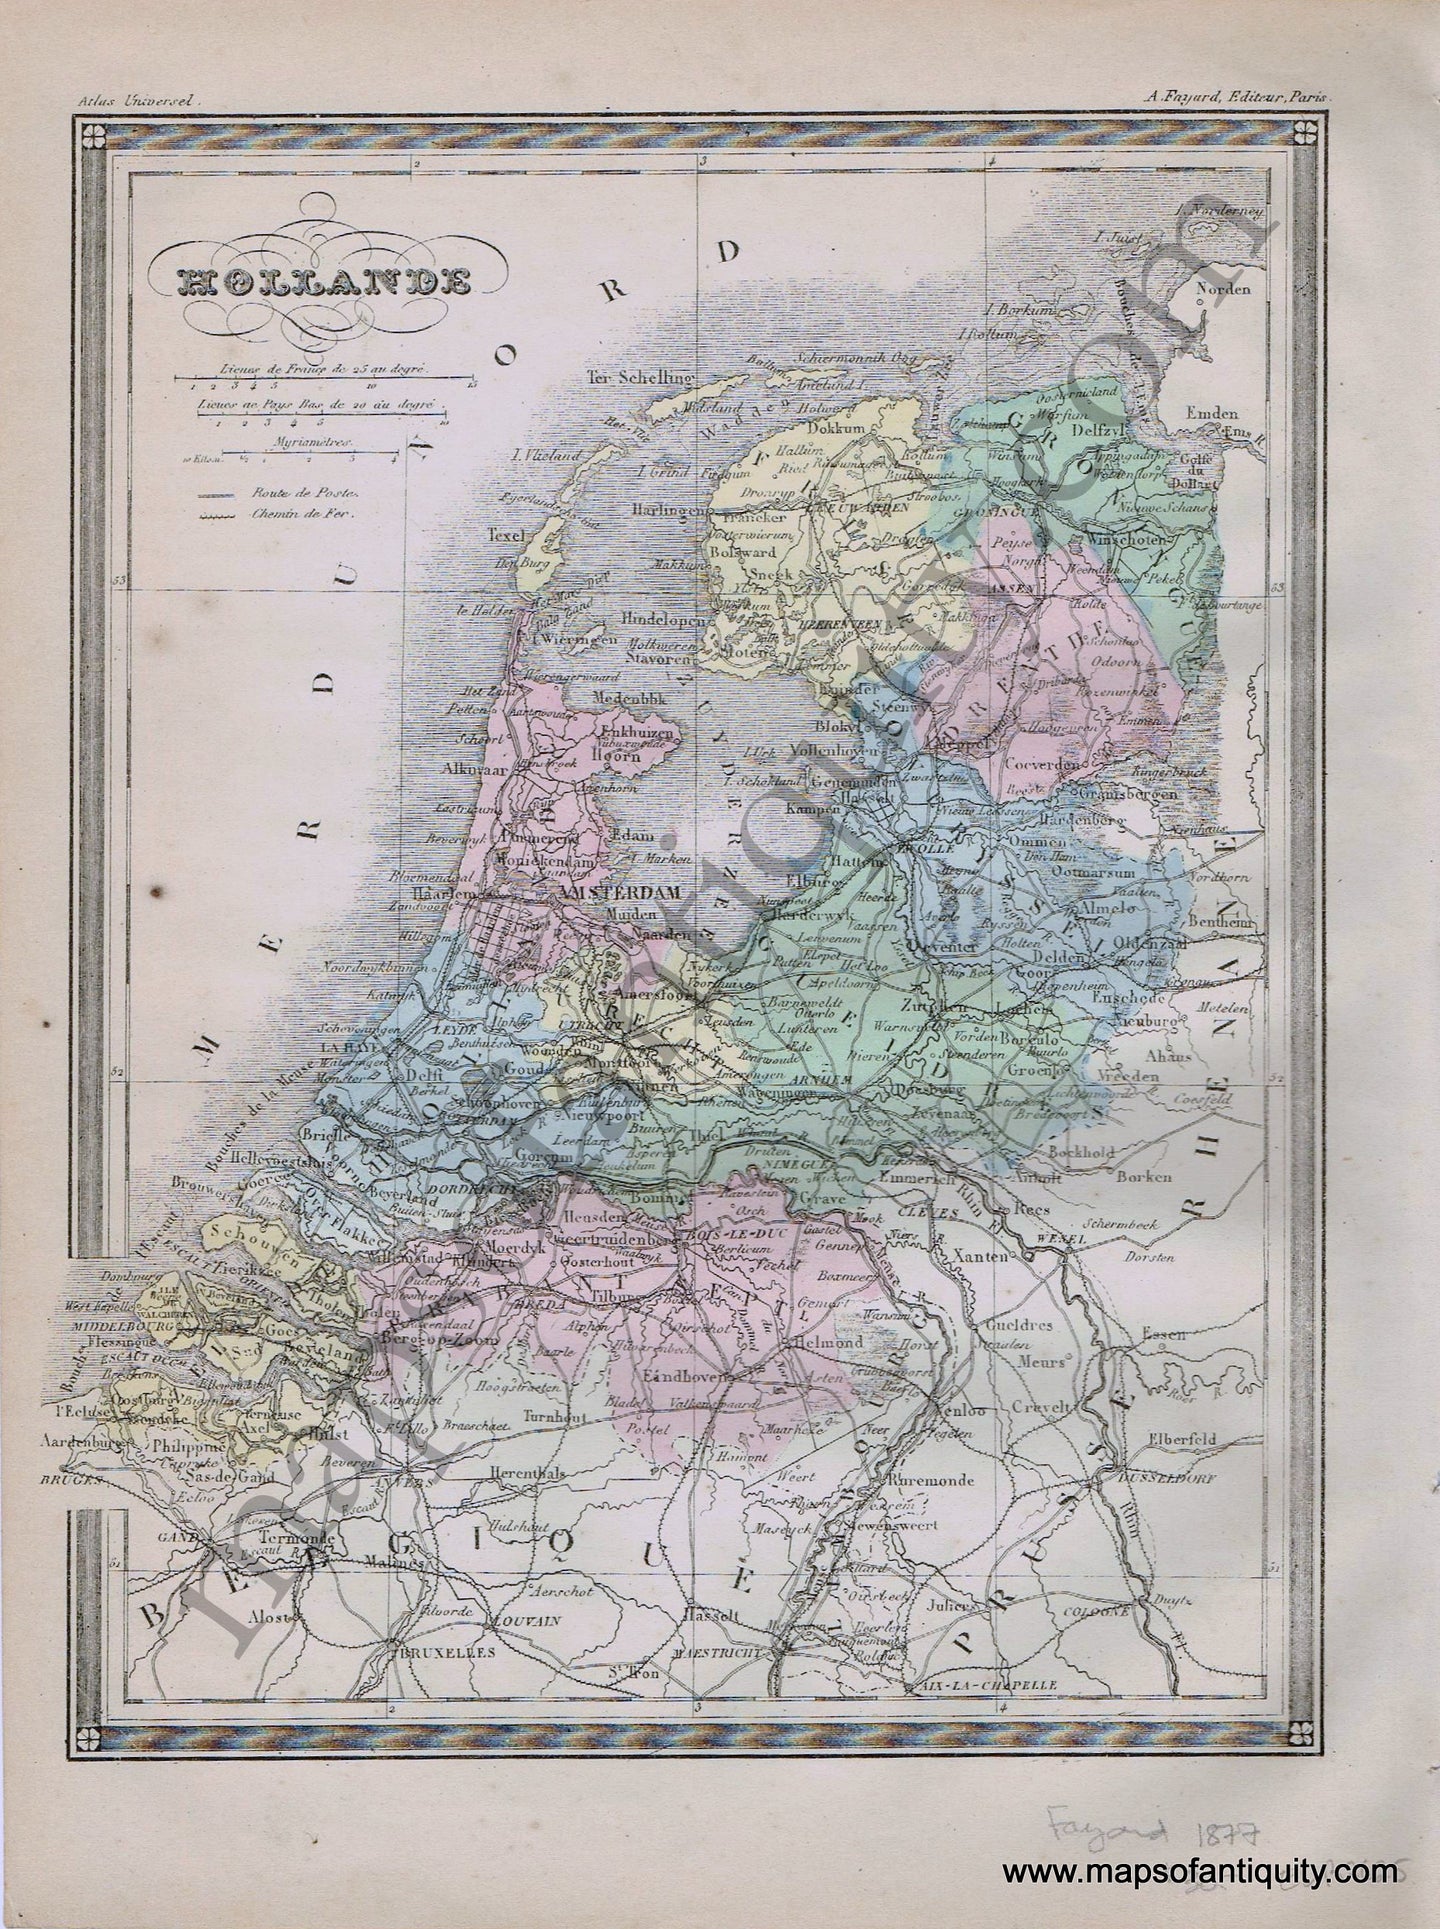 Antique-Printed-Color-Map-Europe-Hollande---the-Netherlands-1877-Fayard-Holland-&-The-Netherlands-1800s-19th-century-Maps-of-Antiquity